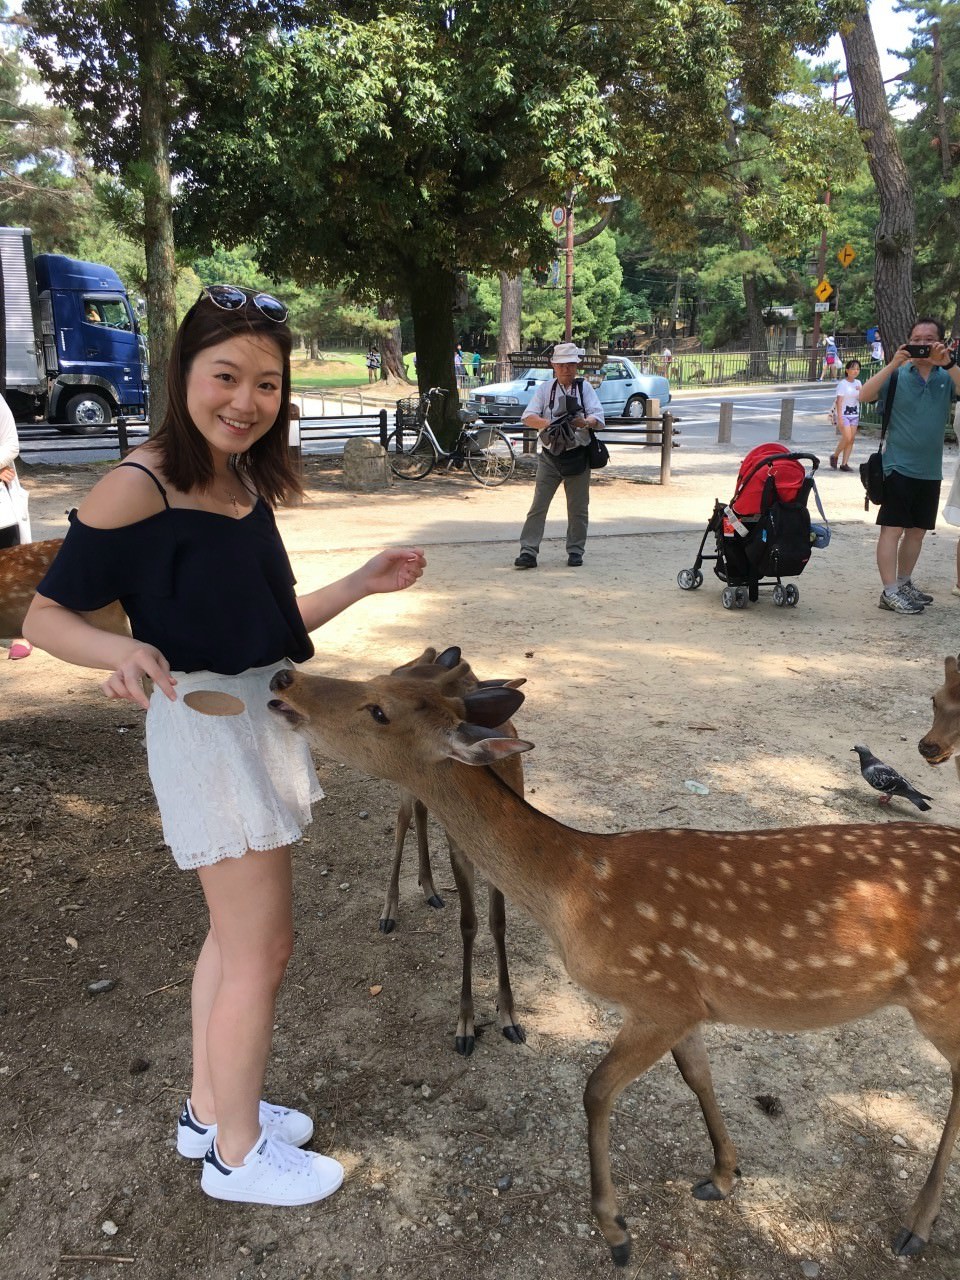 The deer was eager to eat our flying Senbei